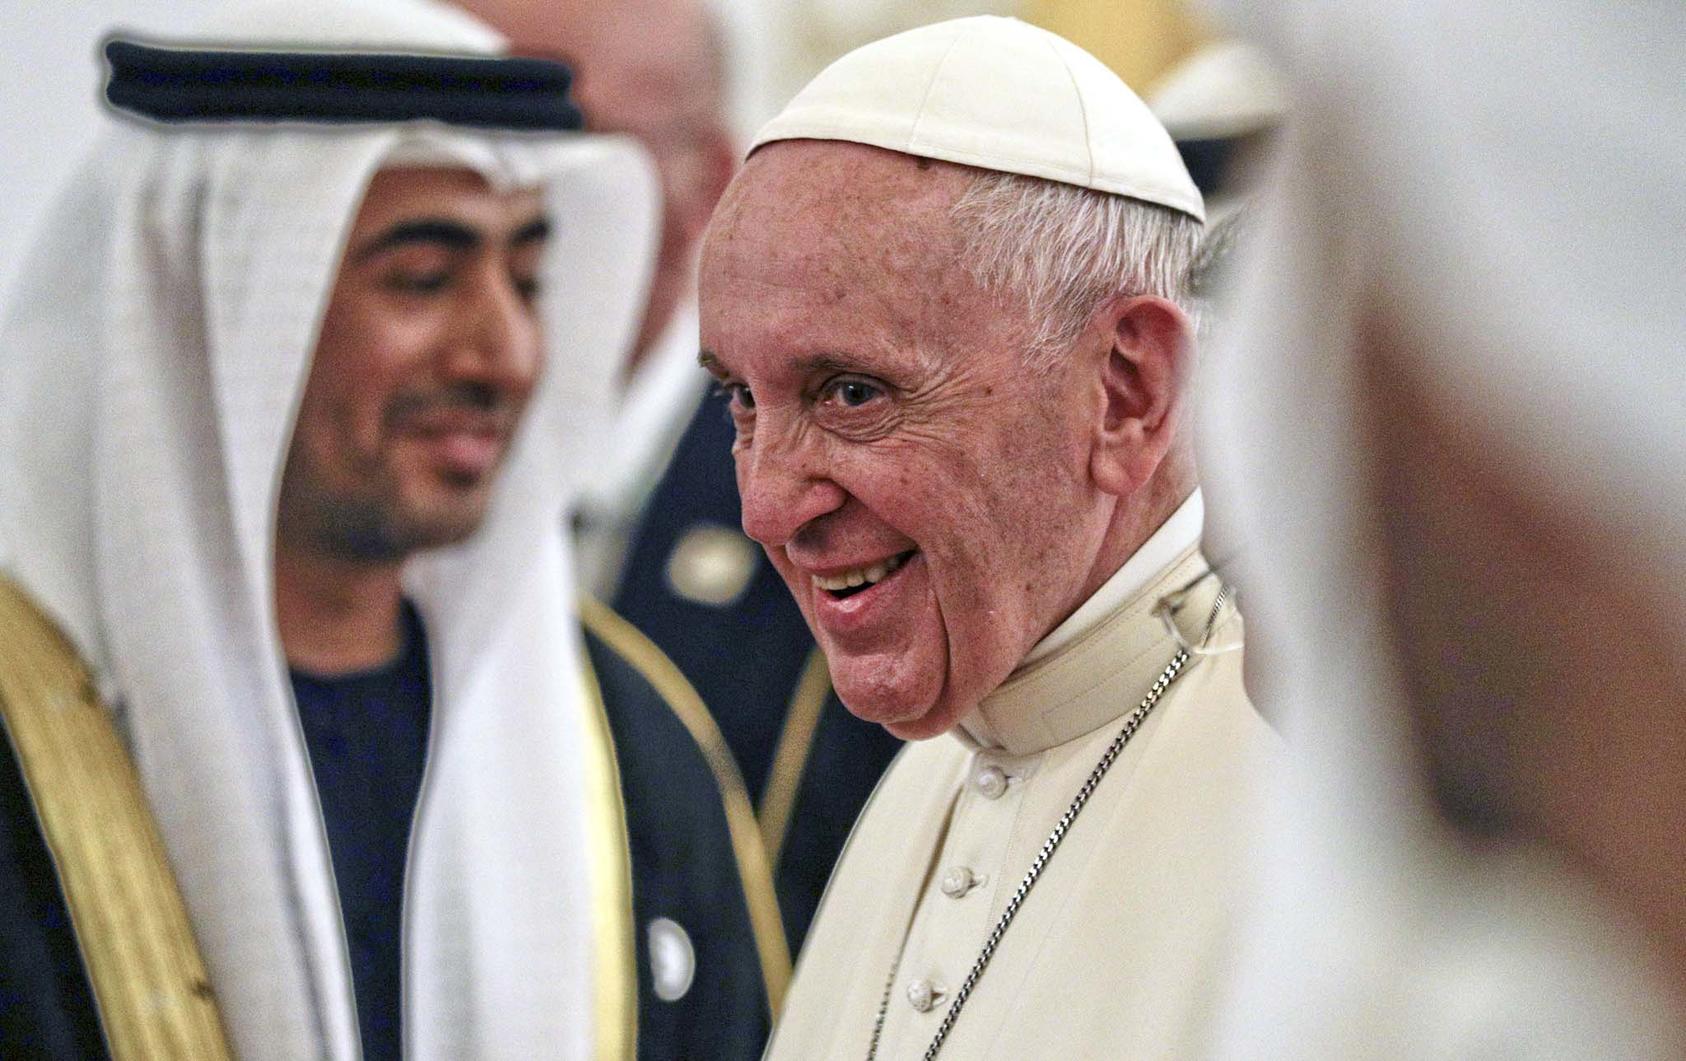 Pope Francis arrives at the airport in Abu Dhabi, United Arab Emirates, Feb. 3, 2019. (Andrew Medichini/Pool via The New York Times)